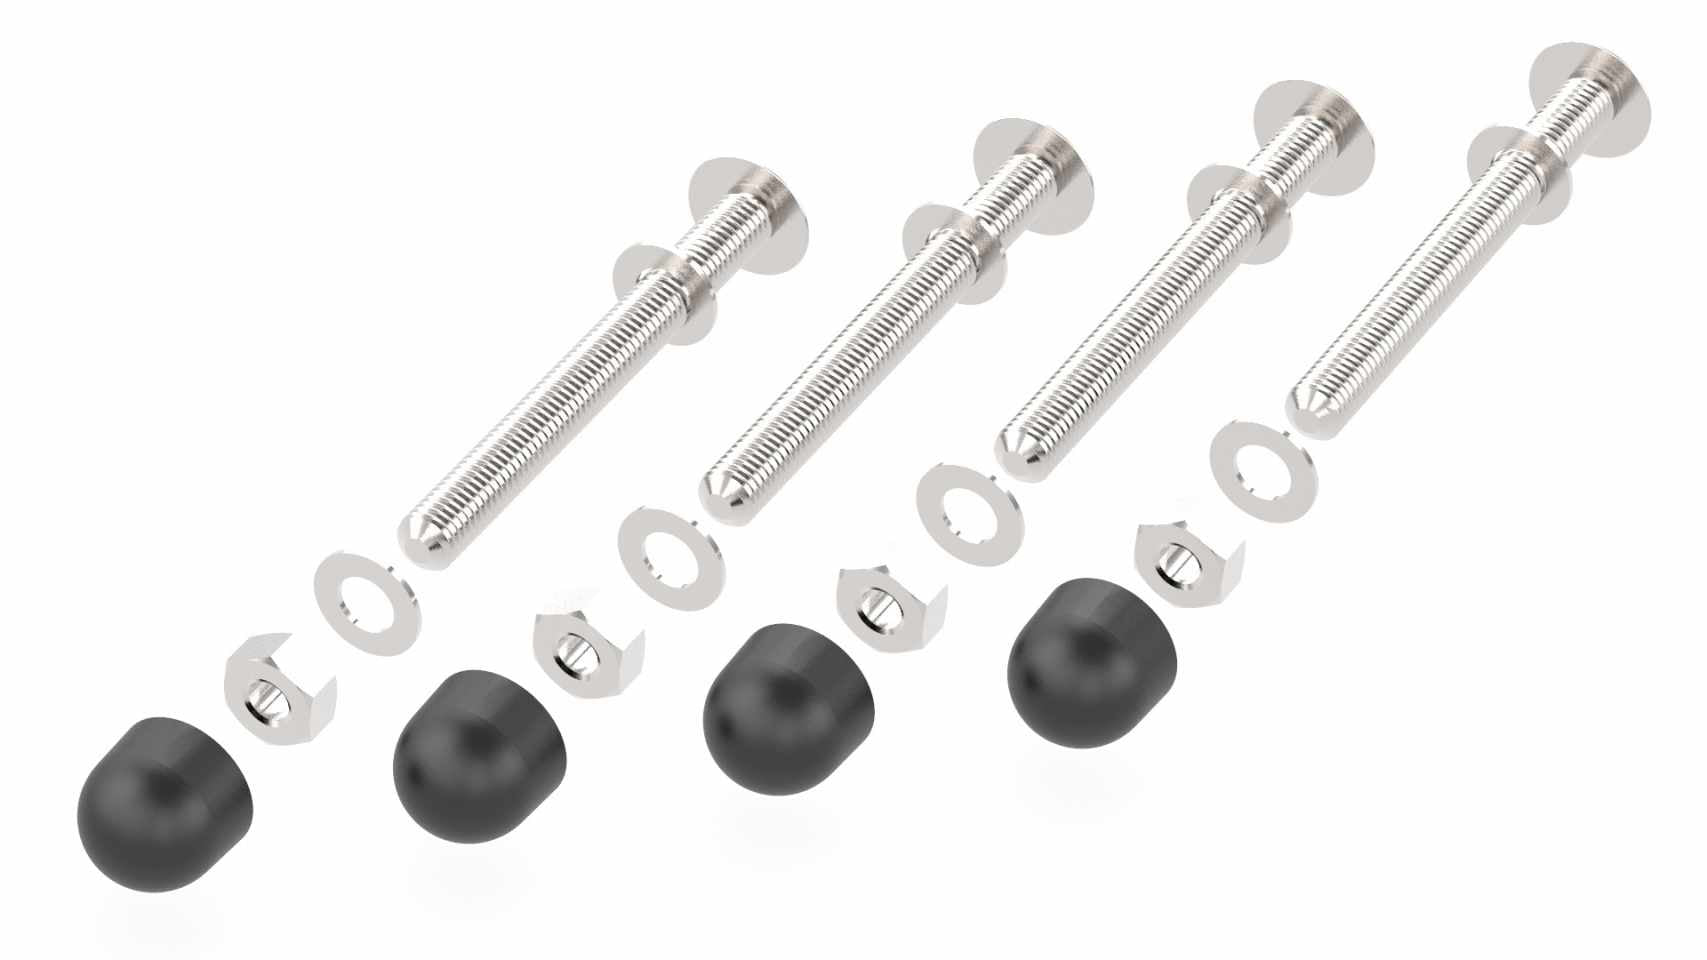 Axle Screw Set 43 - Roll and Pole